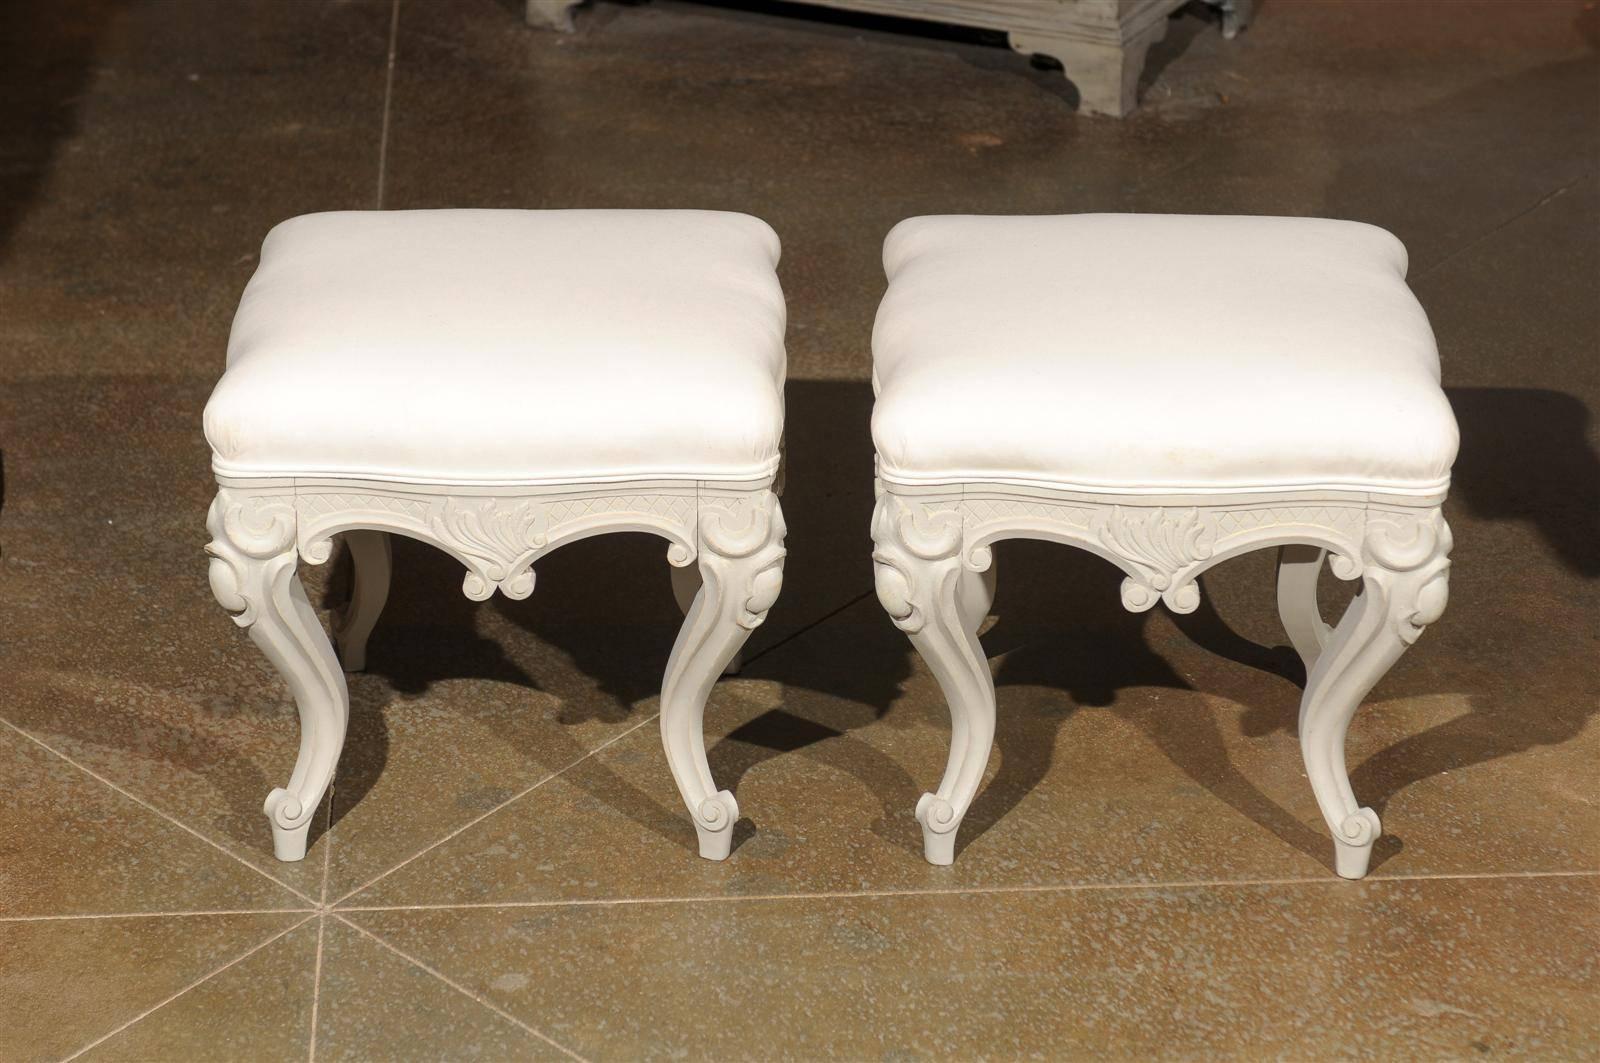 Pair of Swedish Rococo Style Carved Painted Upholstered Stools, circa 1890 For Sale 2